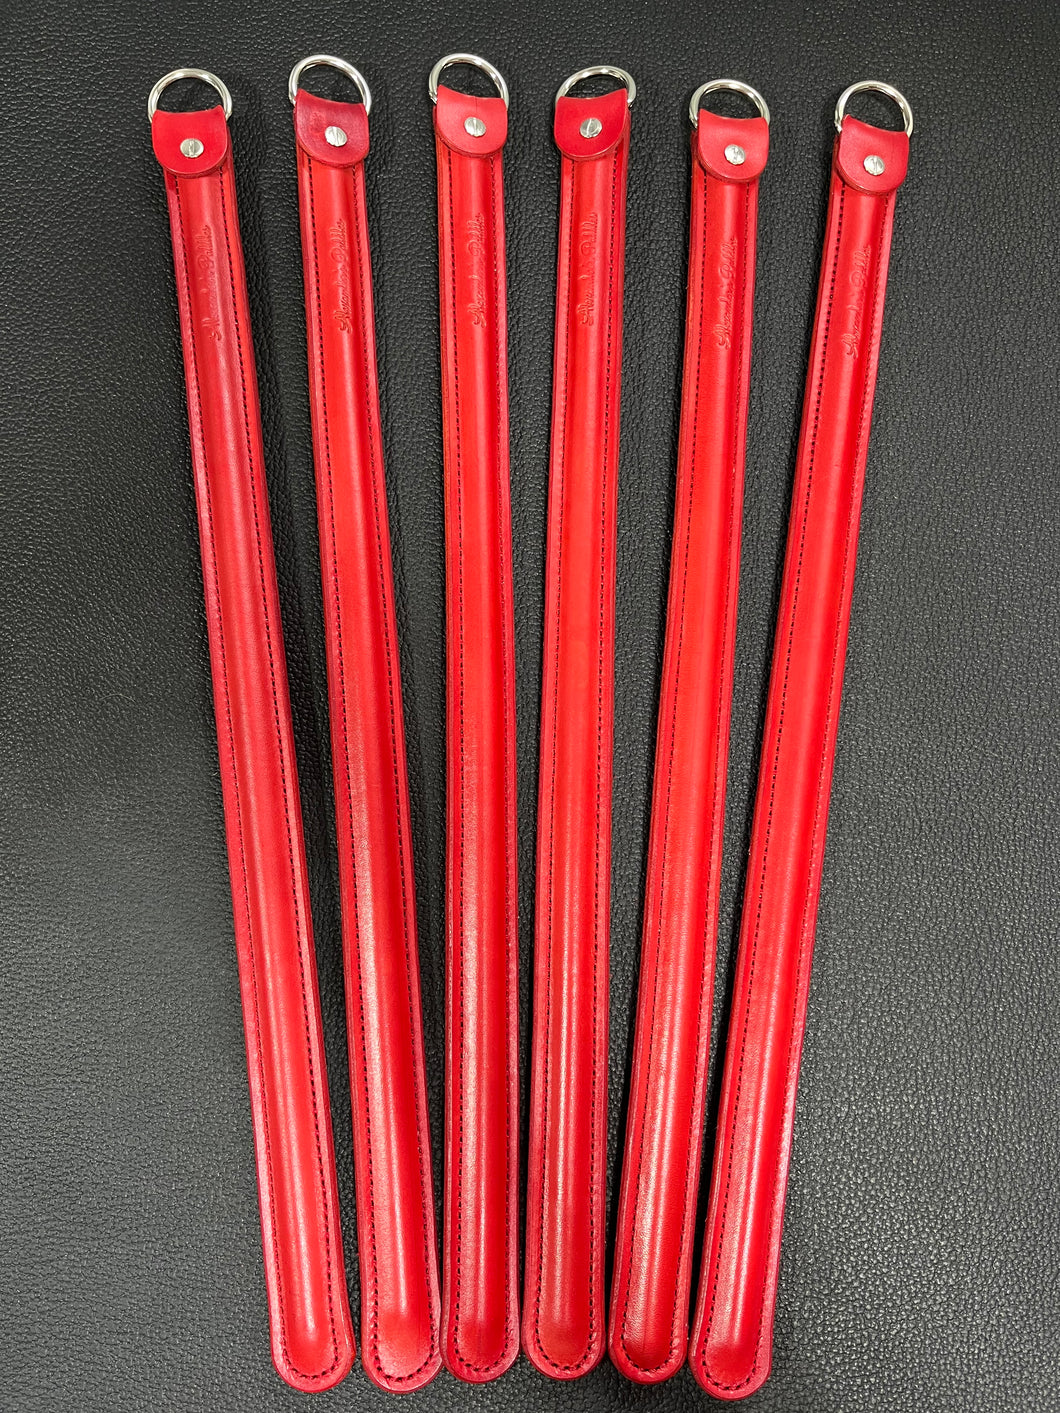 Cane: Leather-Bound, Red